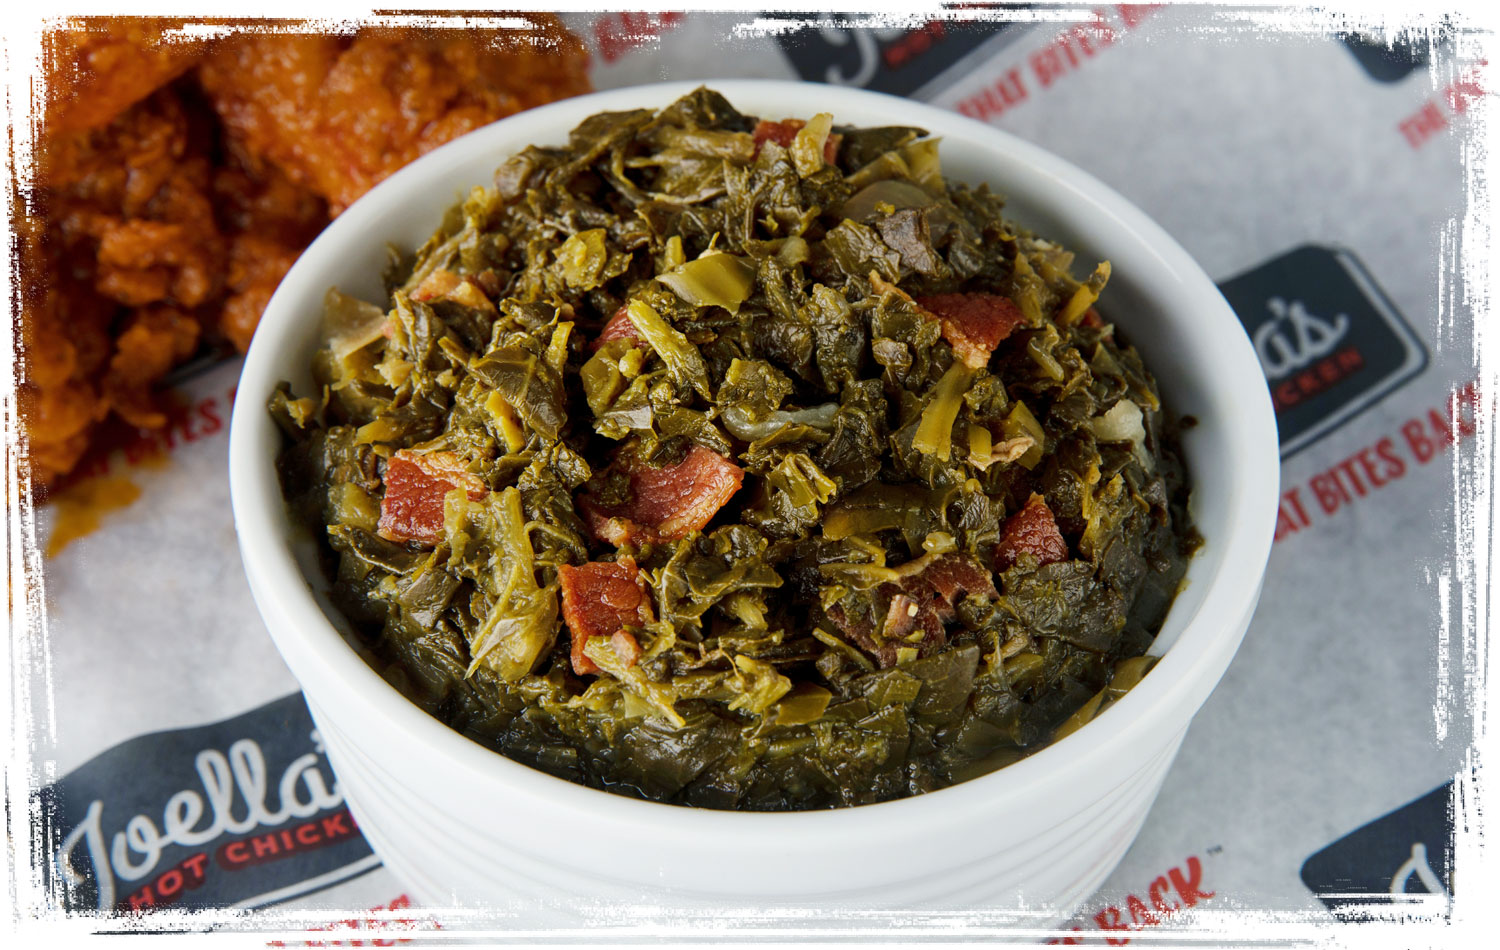 Joella's Collard Greens with Bacon southern side